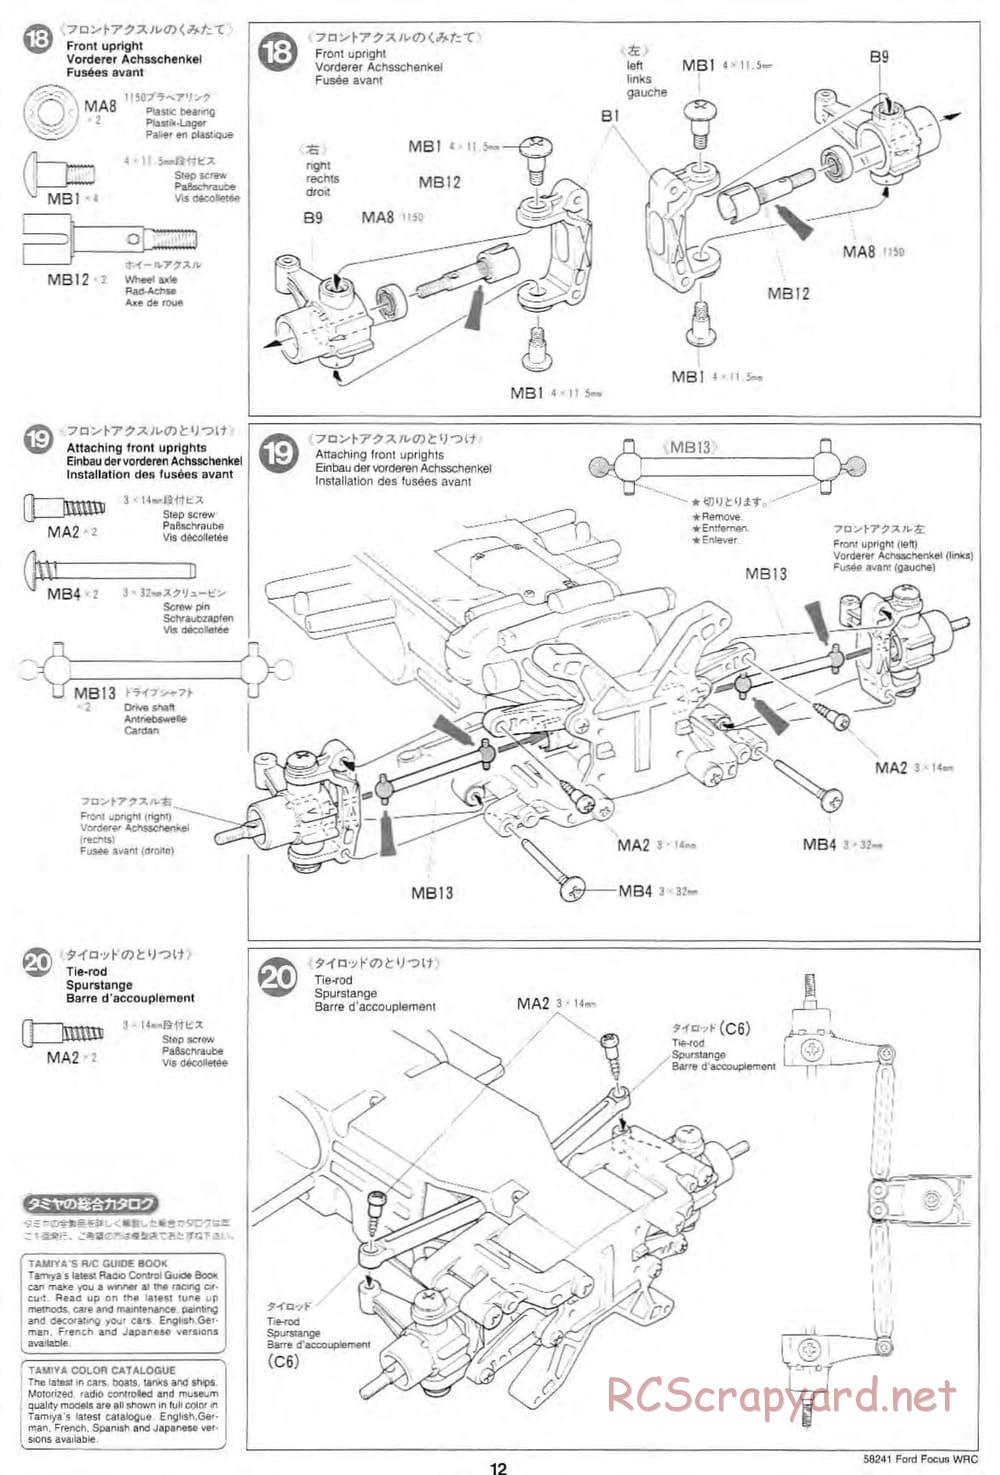 Tamiya - Ford Focus WRC - TL-01 Chassis - Manual - Page 12